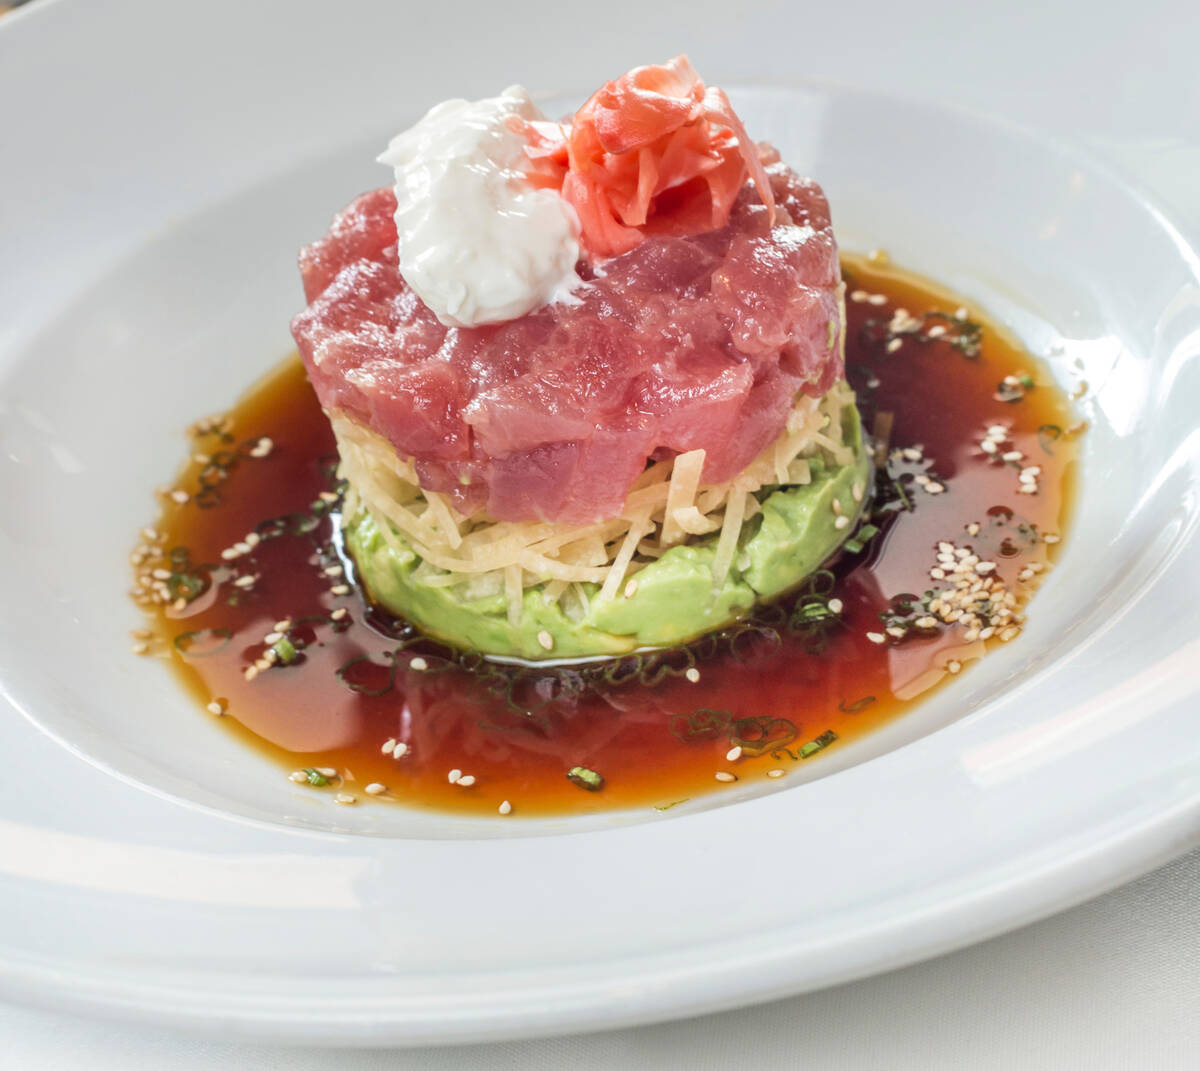 Ahi tartare from Ocean Prime, the $20 million steak and seafood restaurant taking shape atop Pr ...